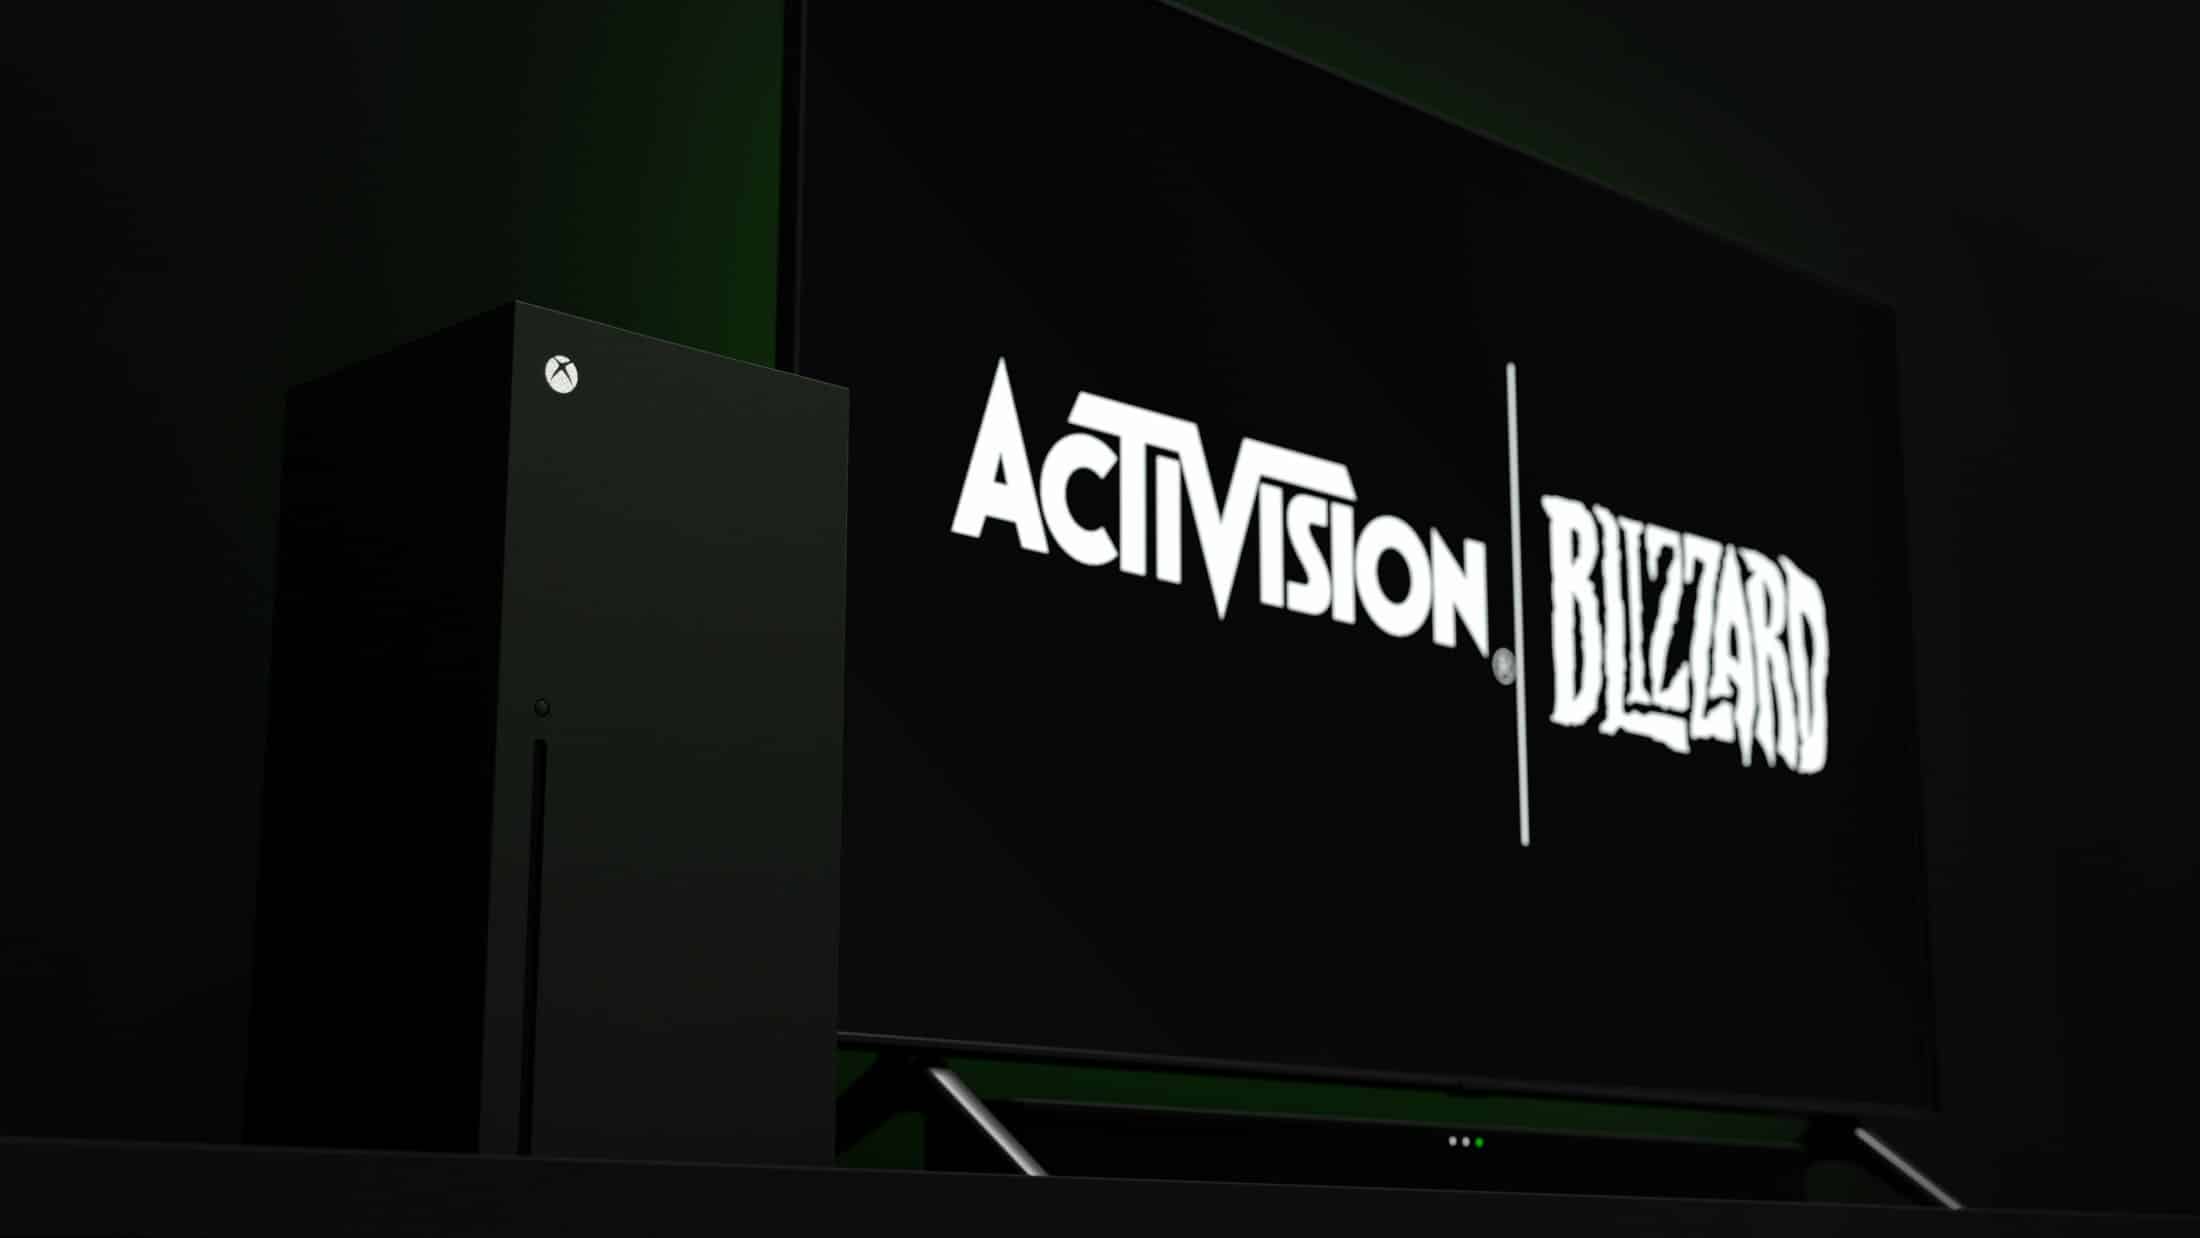 "Nothing unique" about games from Activision